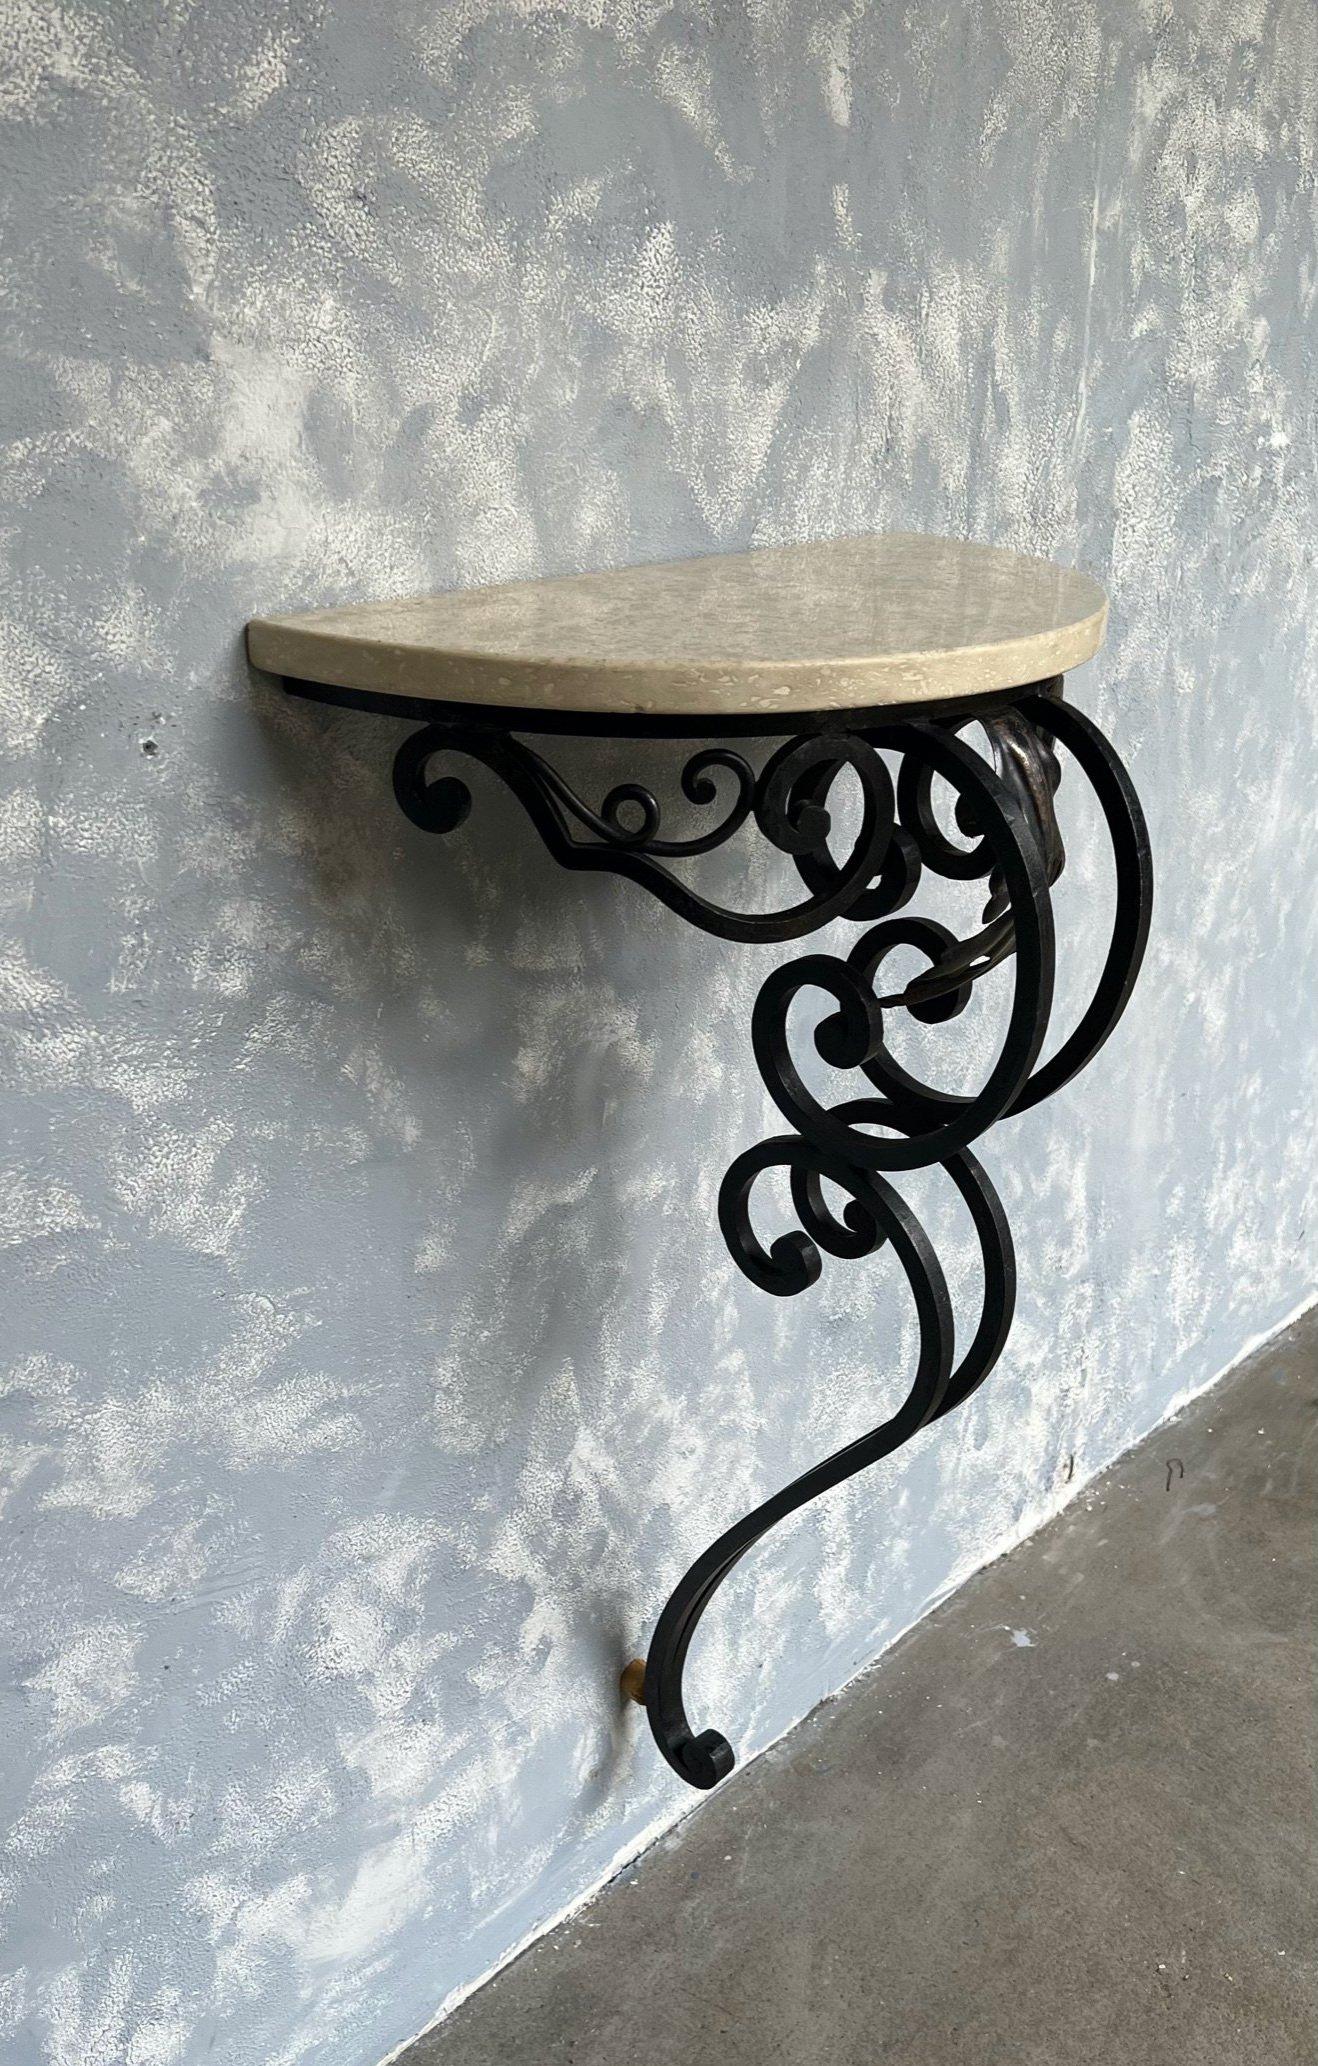 This small demilune wrought iron console is French from the 1940s or 1950s. The heavily scrolled black wrought iron base supports a beautiful travertine top. The console attaches to the wall in 2 places and is made to rest against the wall at a